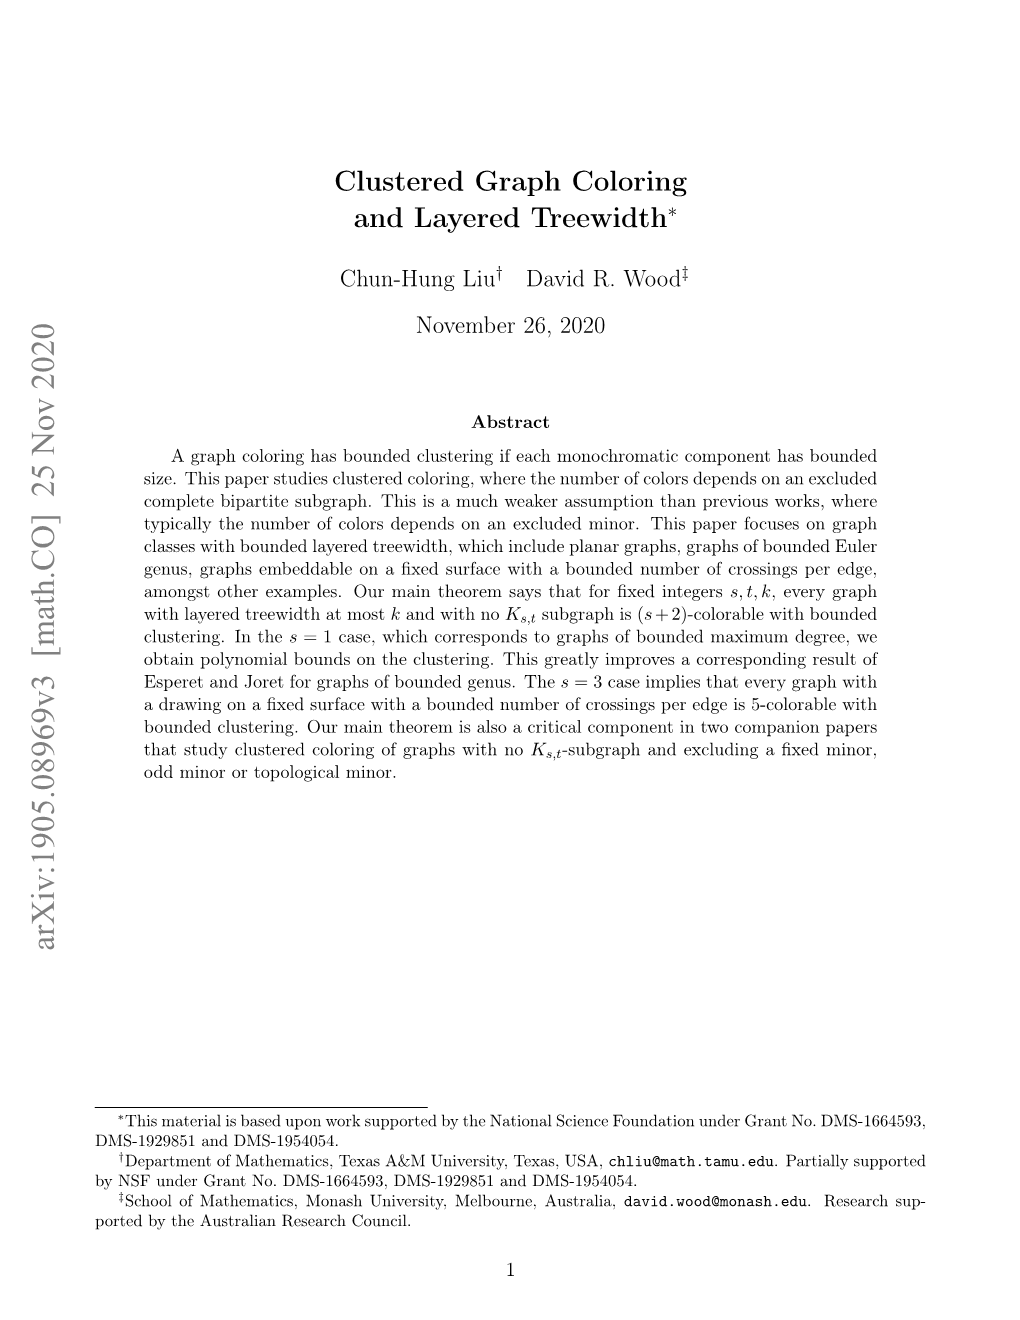 Clustered Graph Coloring and Layered Treewidth∗